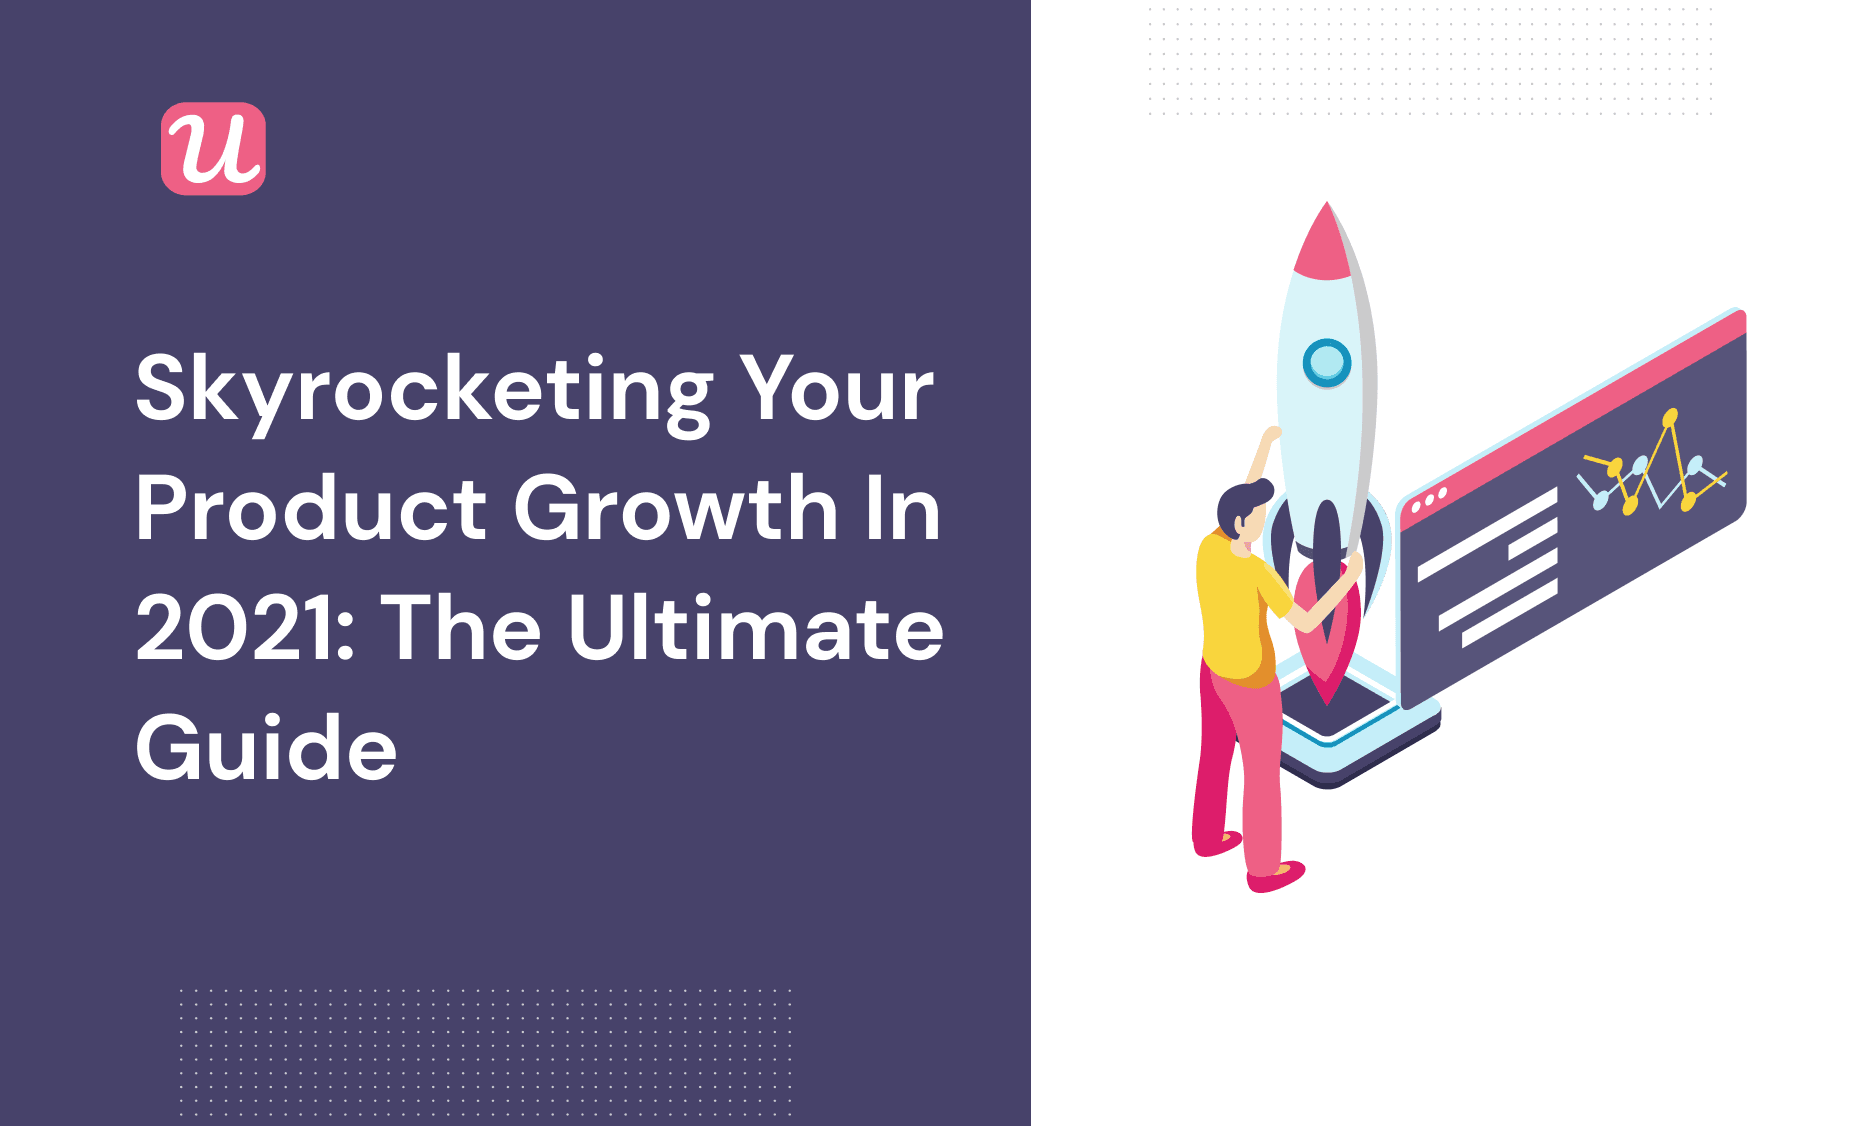 Skyrocketing Your Product Growth in 2021: The Ultimate Guide